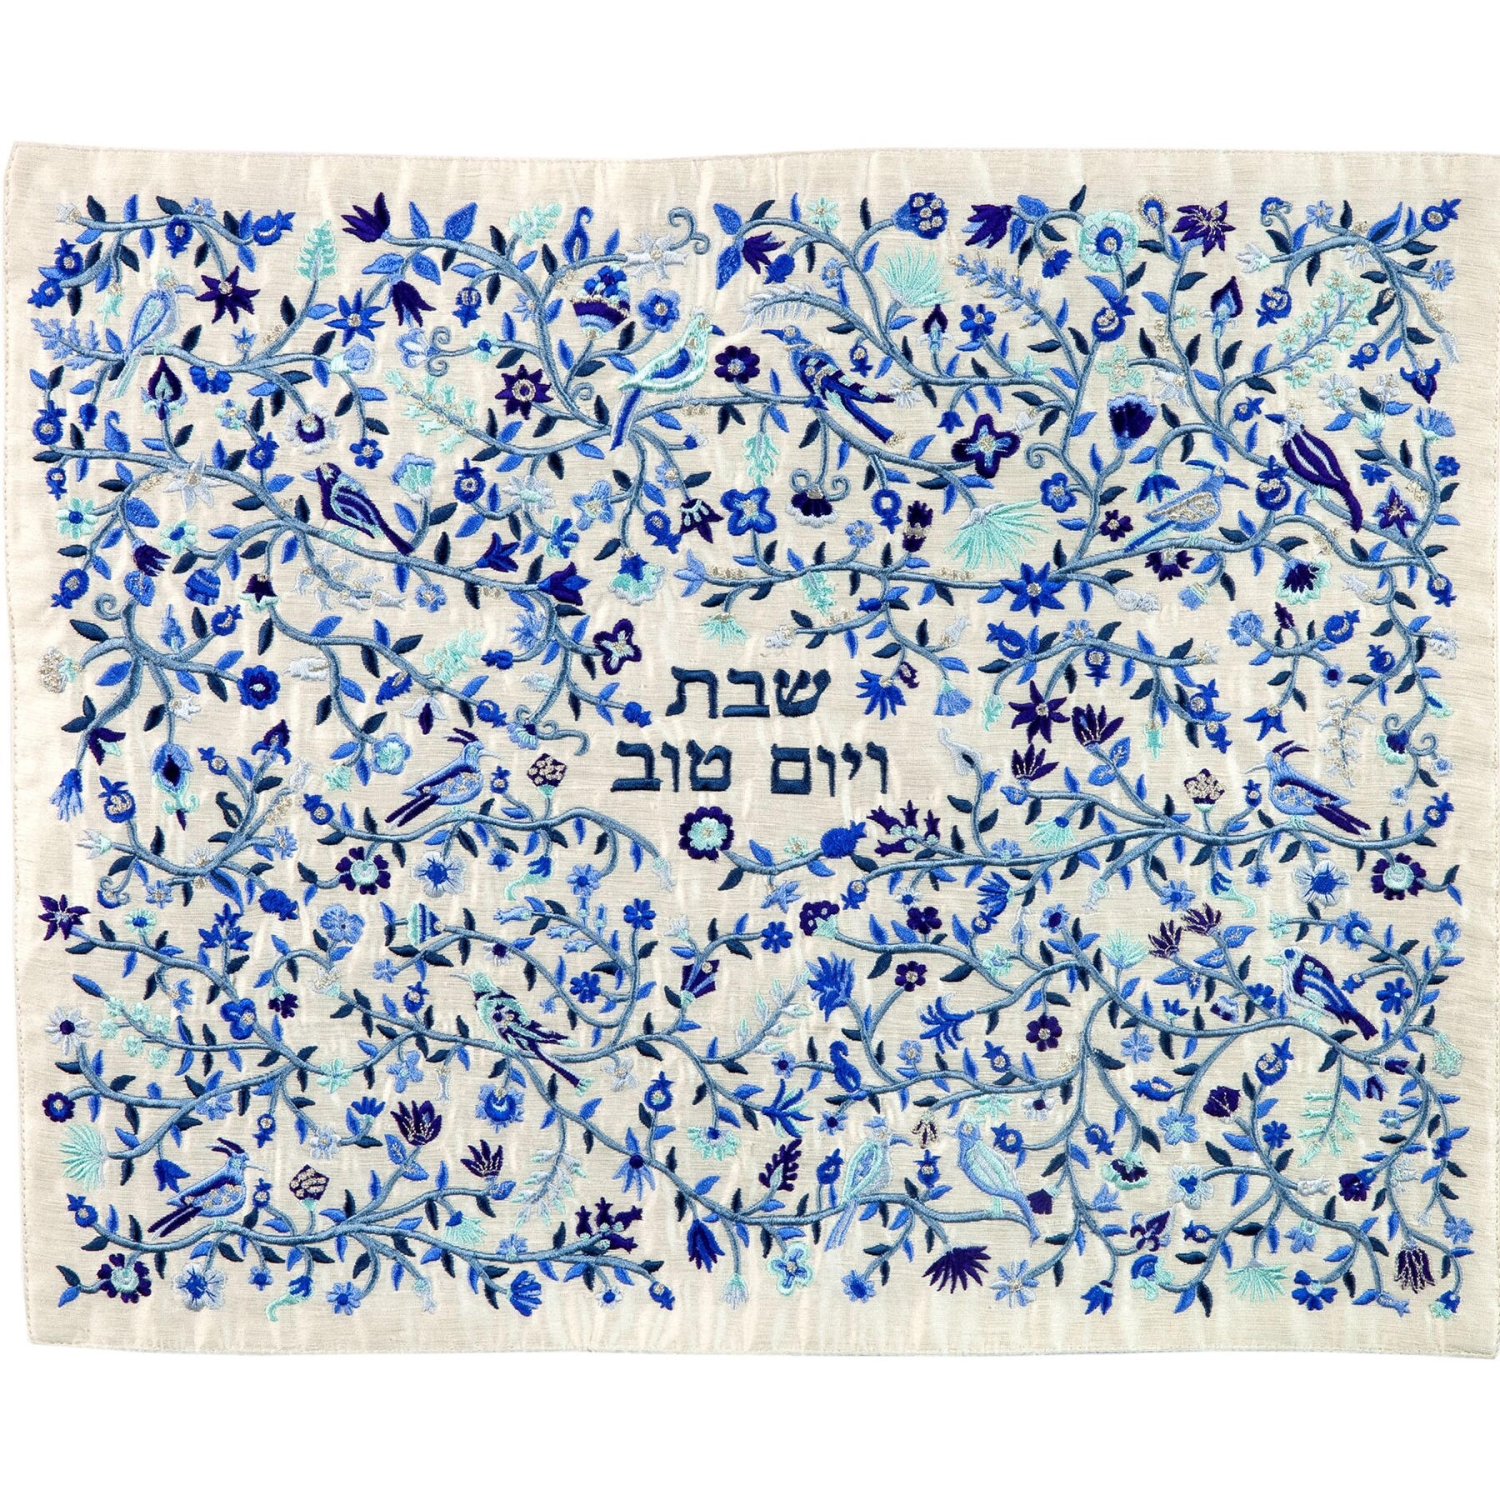 Yair Emanuel Embroidered Challah Cover - Flowers, Birds And Pomegranates (Blue) - 1